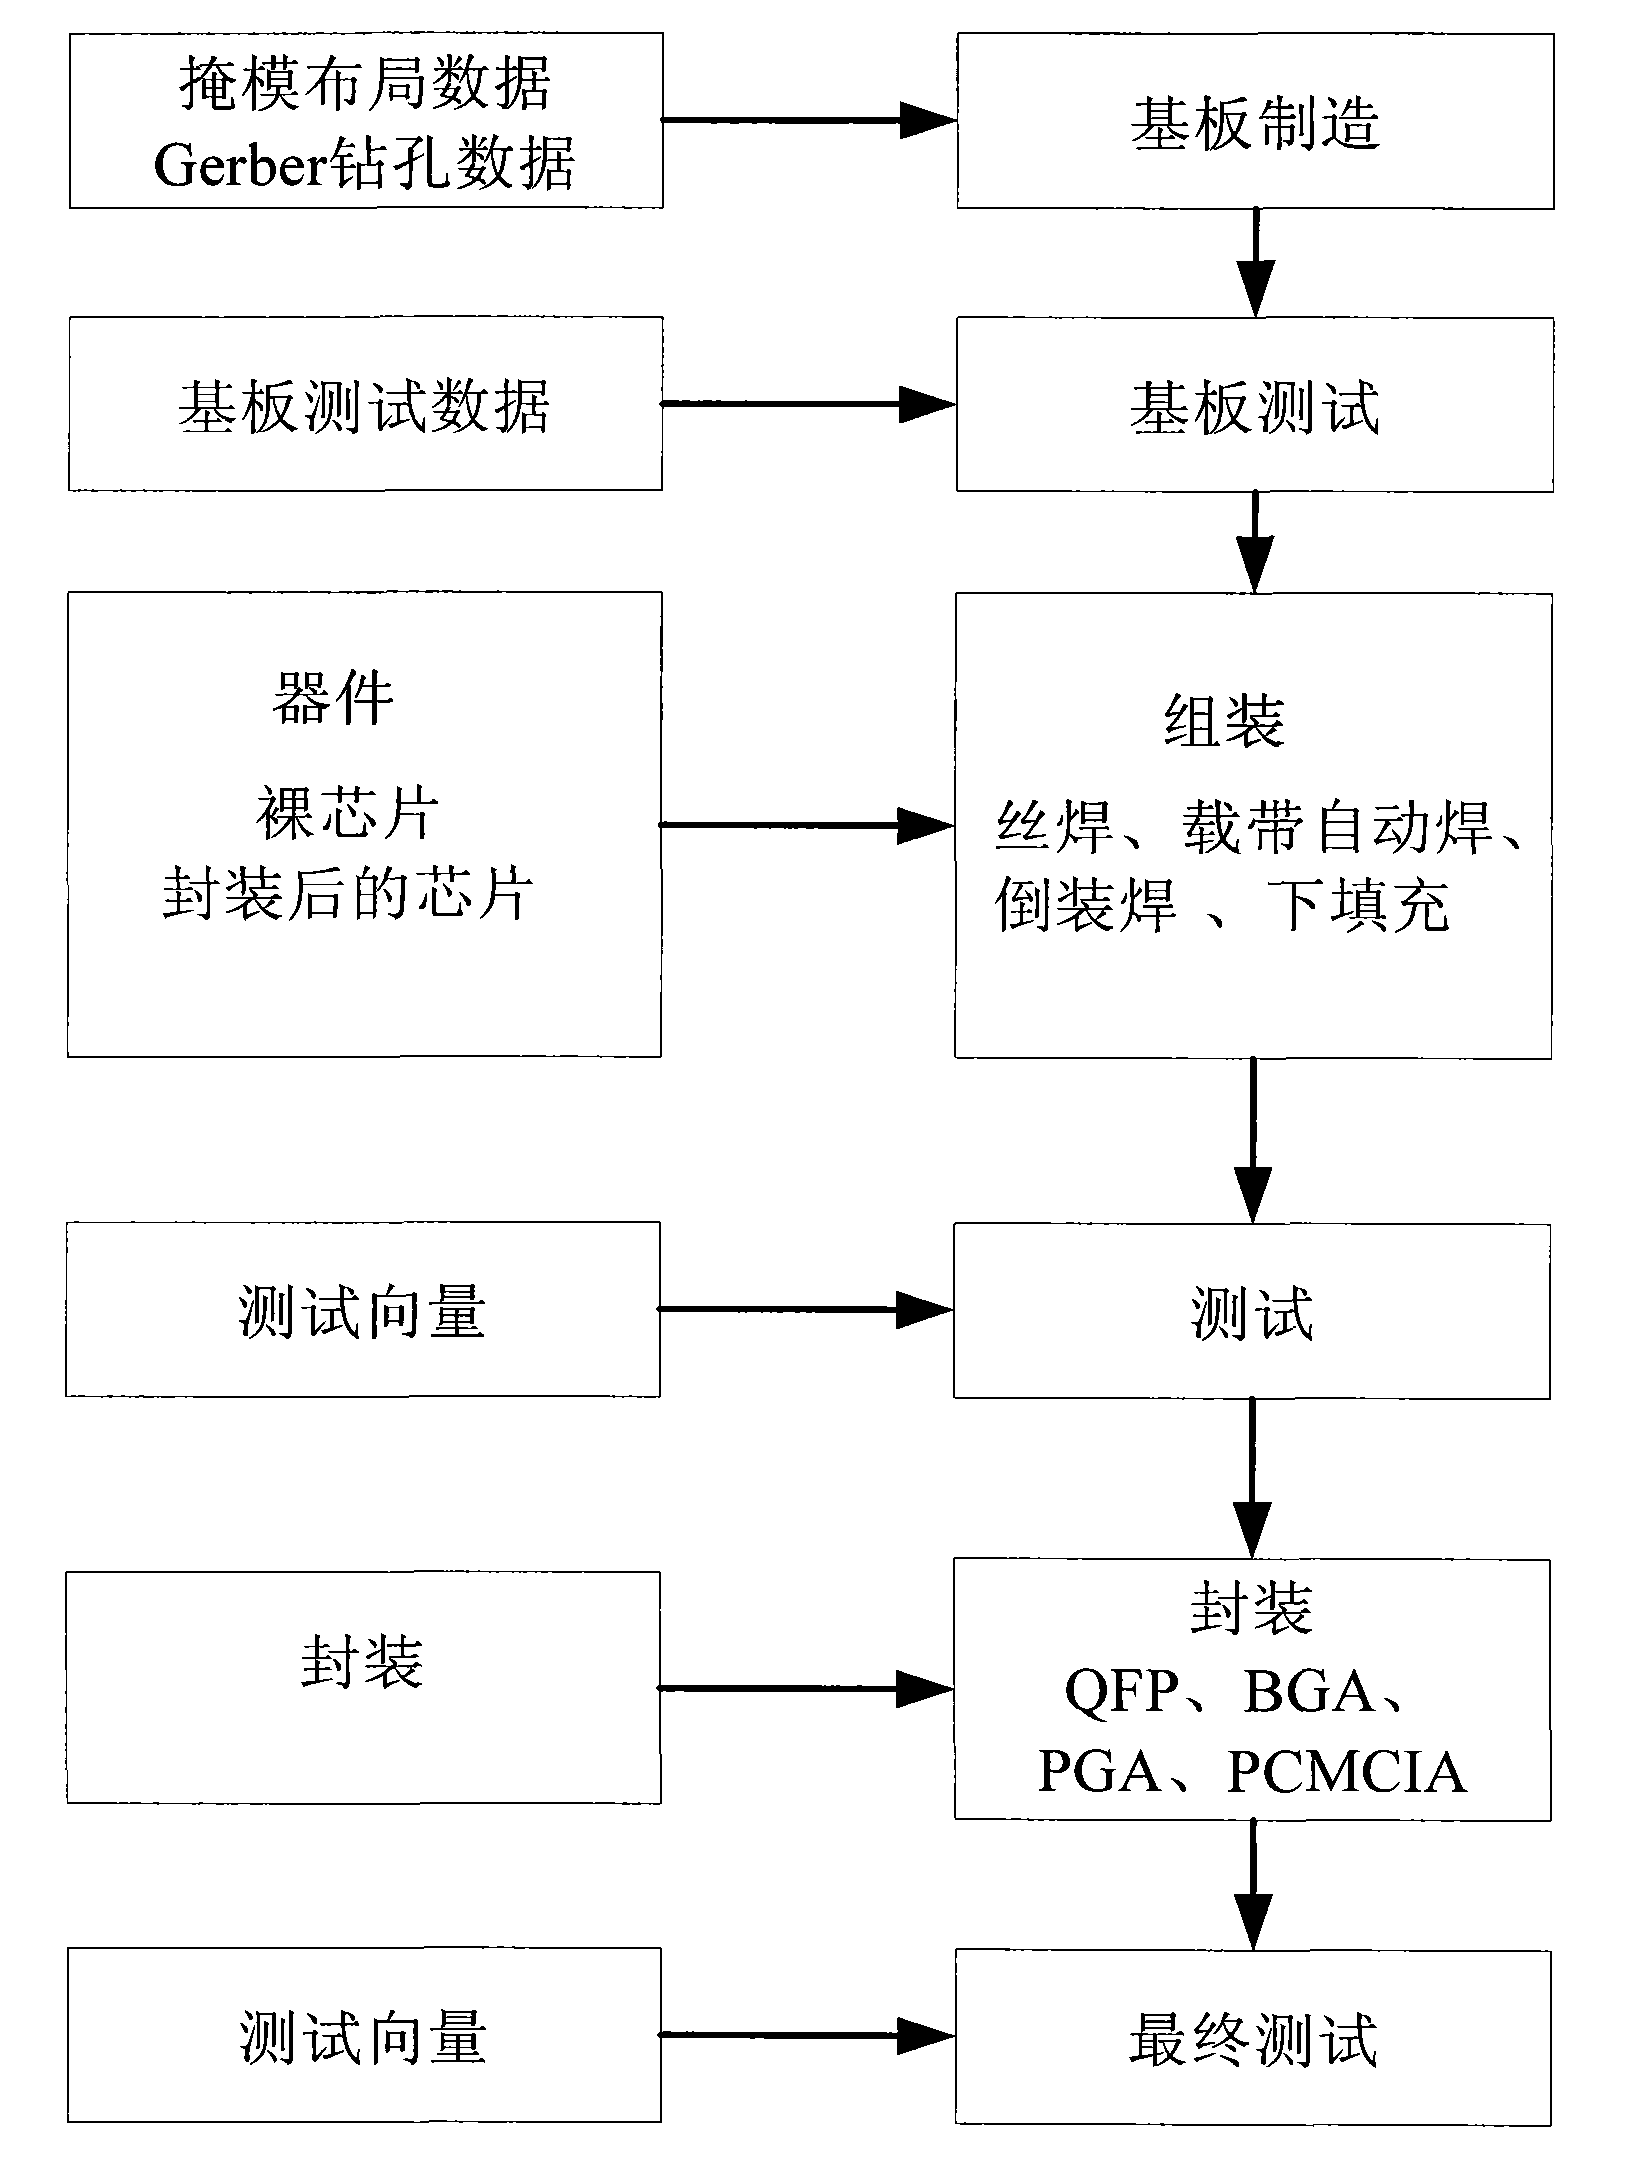 Chip design method for multi-chip module of high-performance processor with optical interface